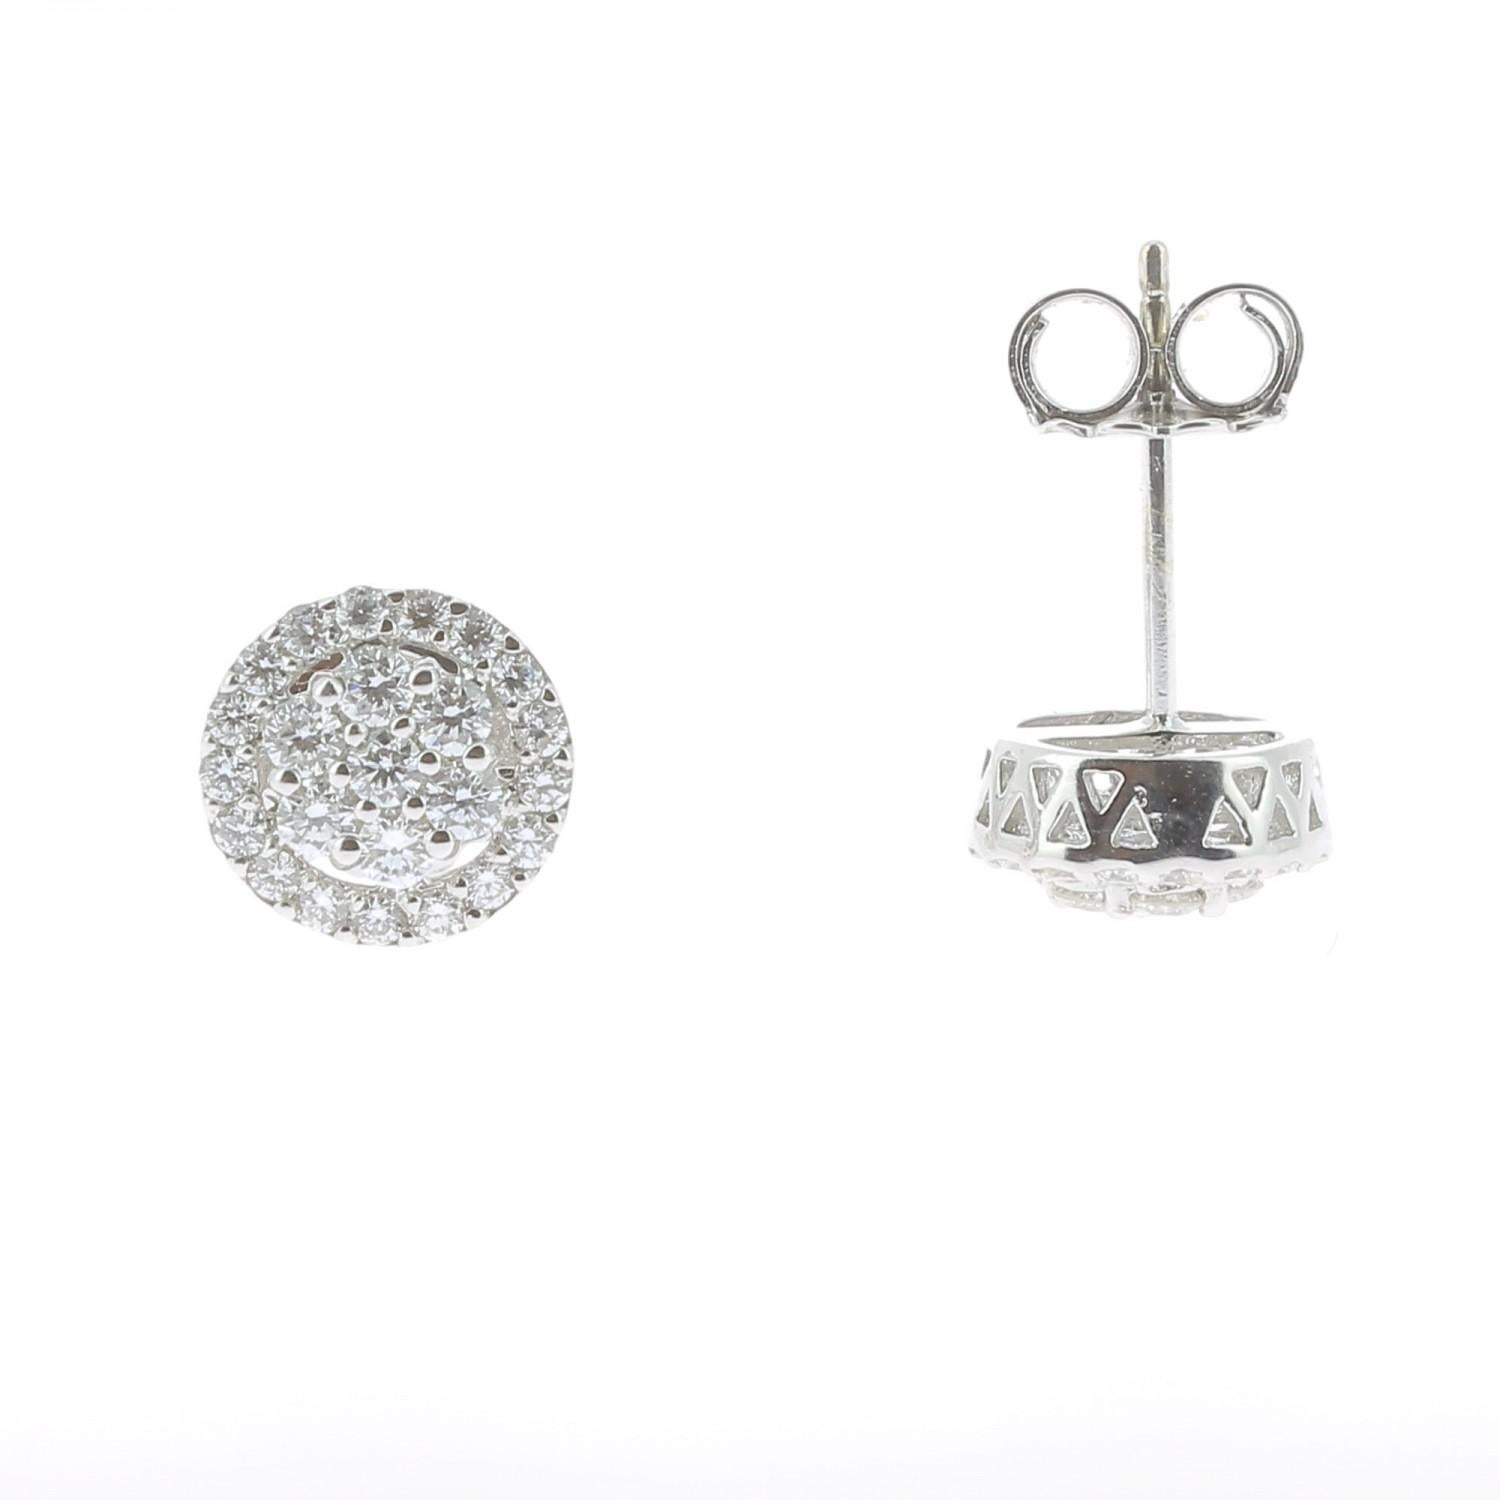 The Round Diamonds Earrings are set with 0.92 Carat
The Diamonds are GVS quality.
The Stud Earrings is in 18K White Gold and weight 3.93 Grams.
